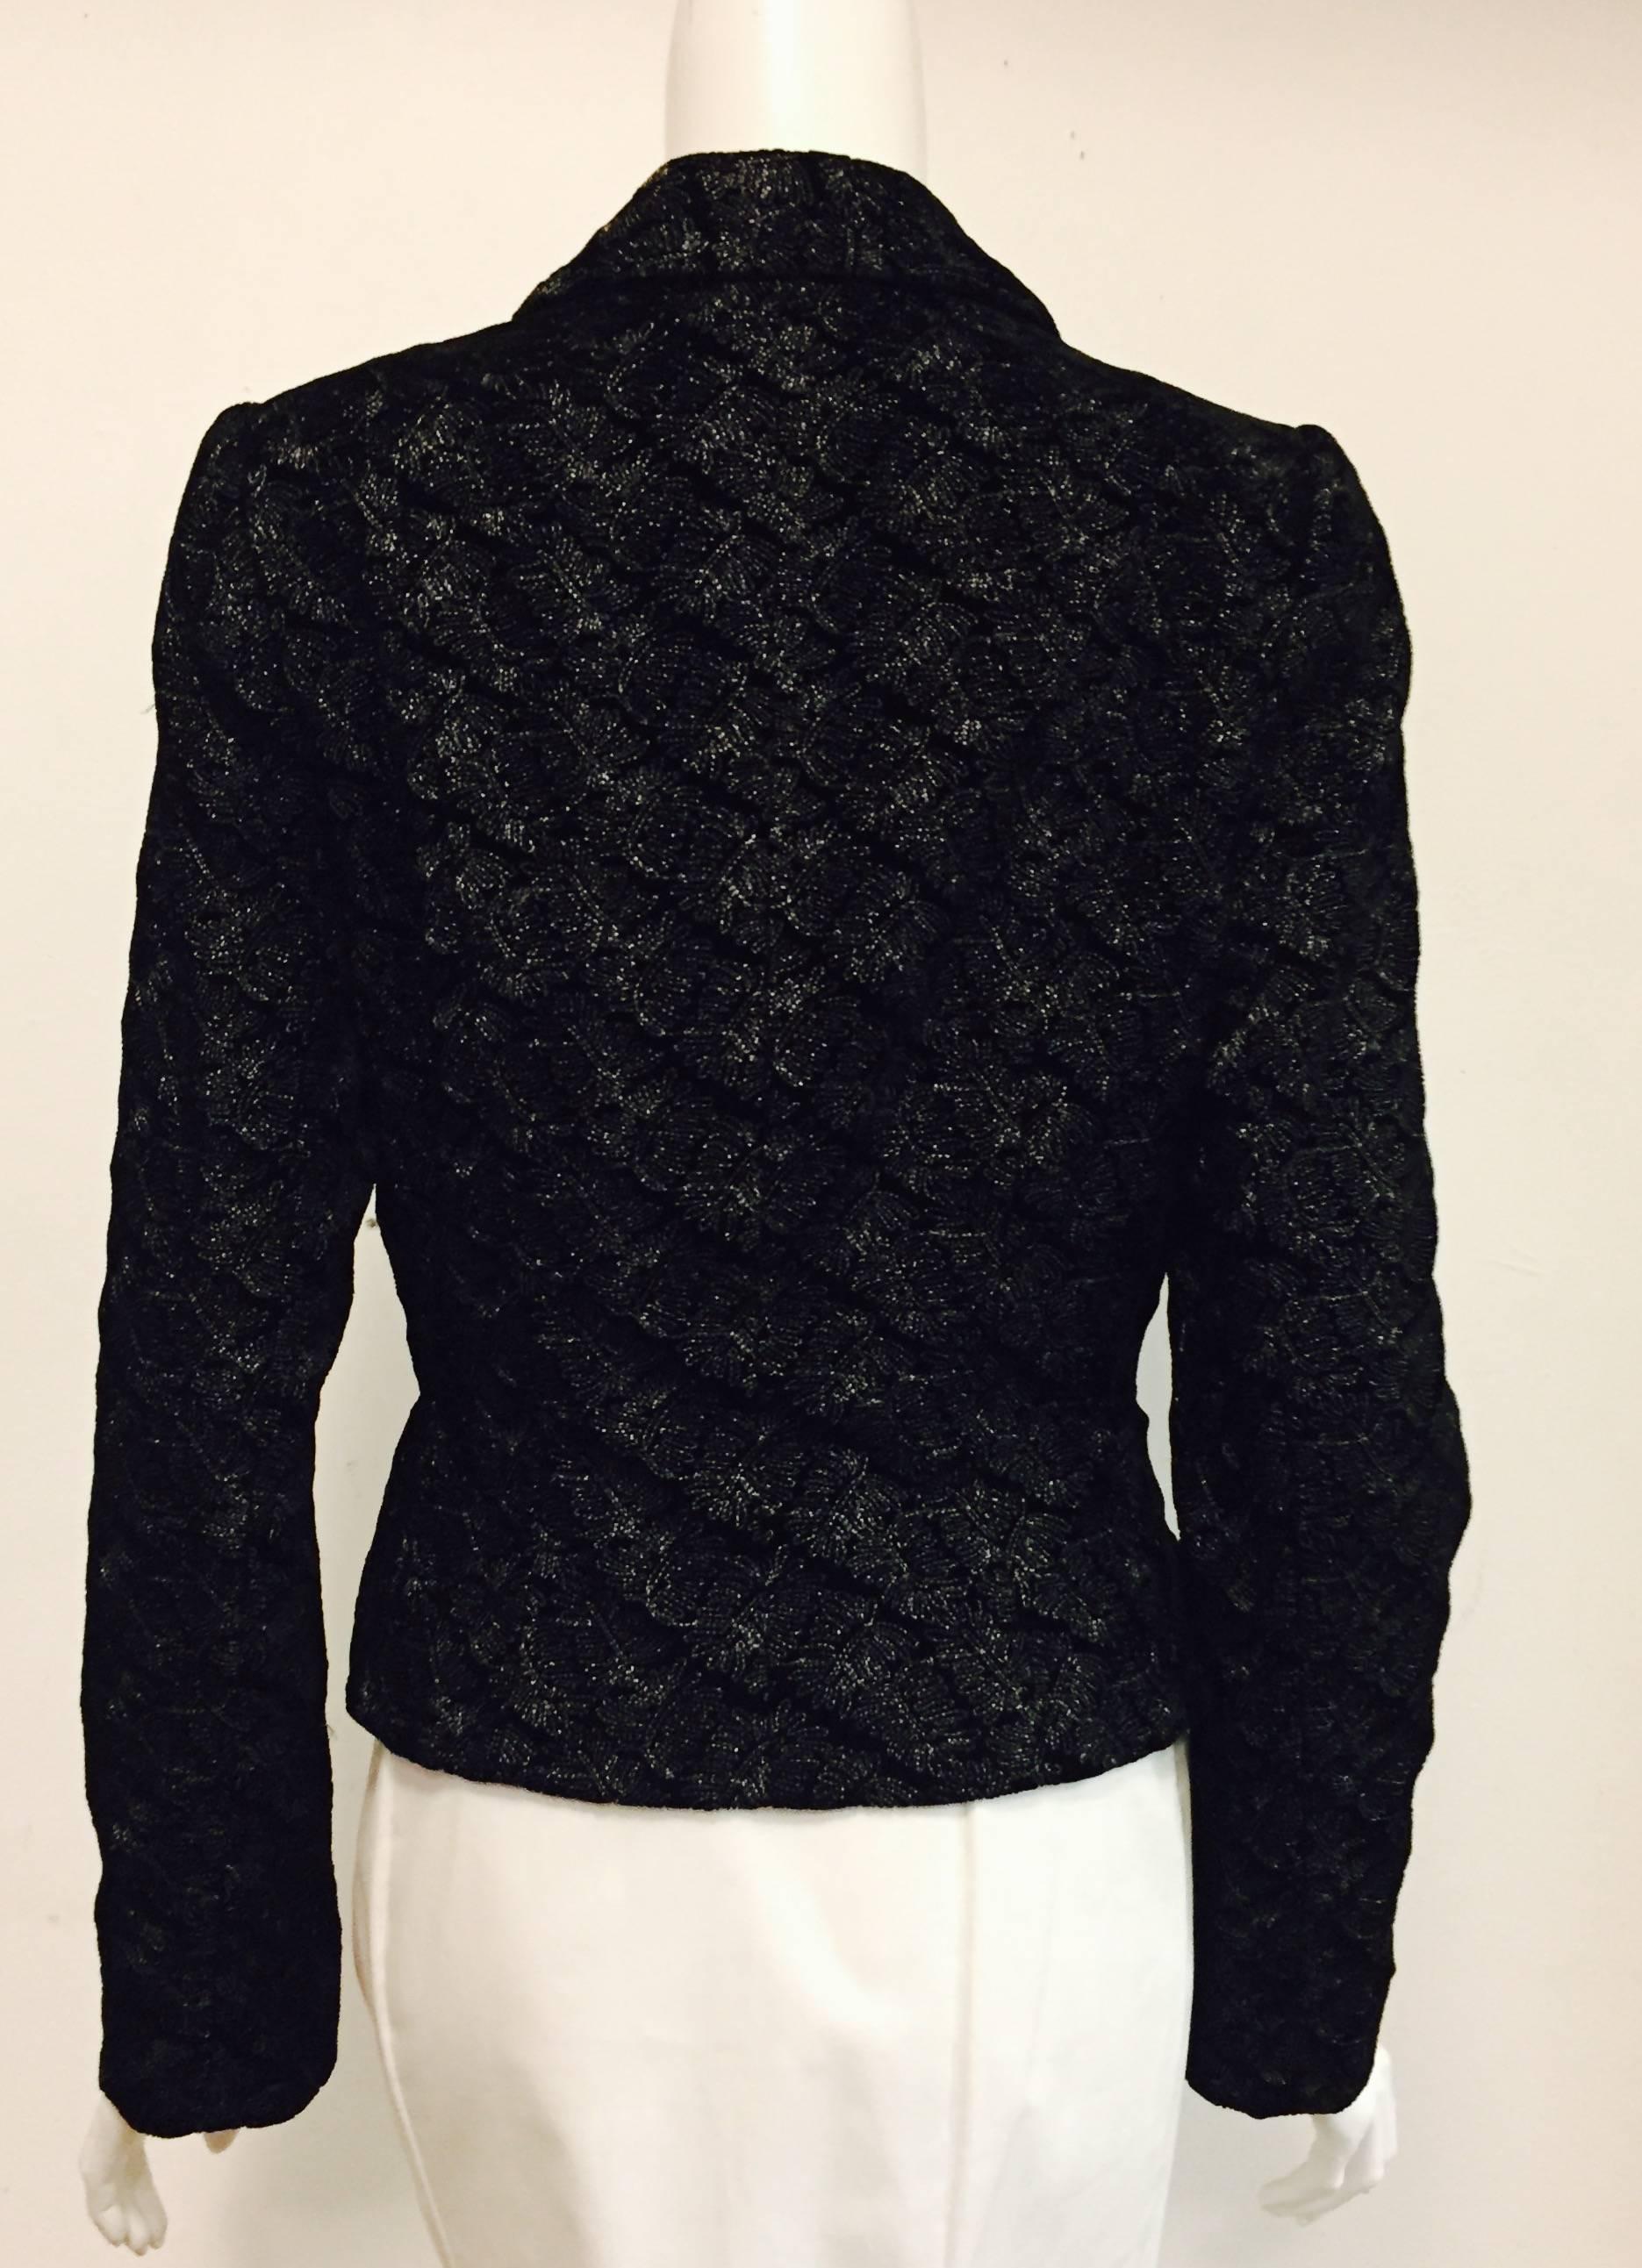 Quintessential Carmen Marc Valvo Black Velvet Jacket w/ Abstract Pattern In Excellent Condition For Sale In Palm Beach, FL